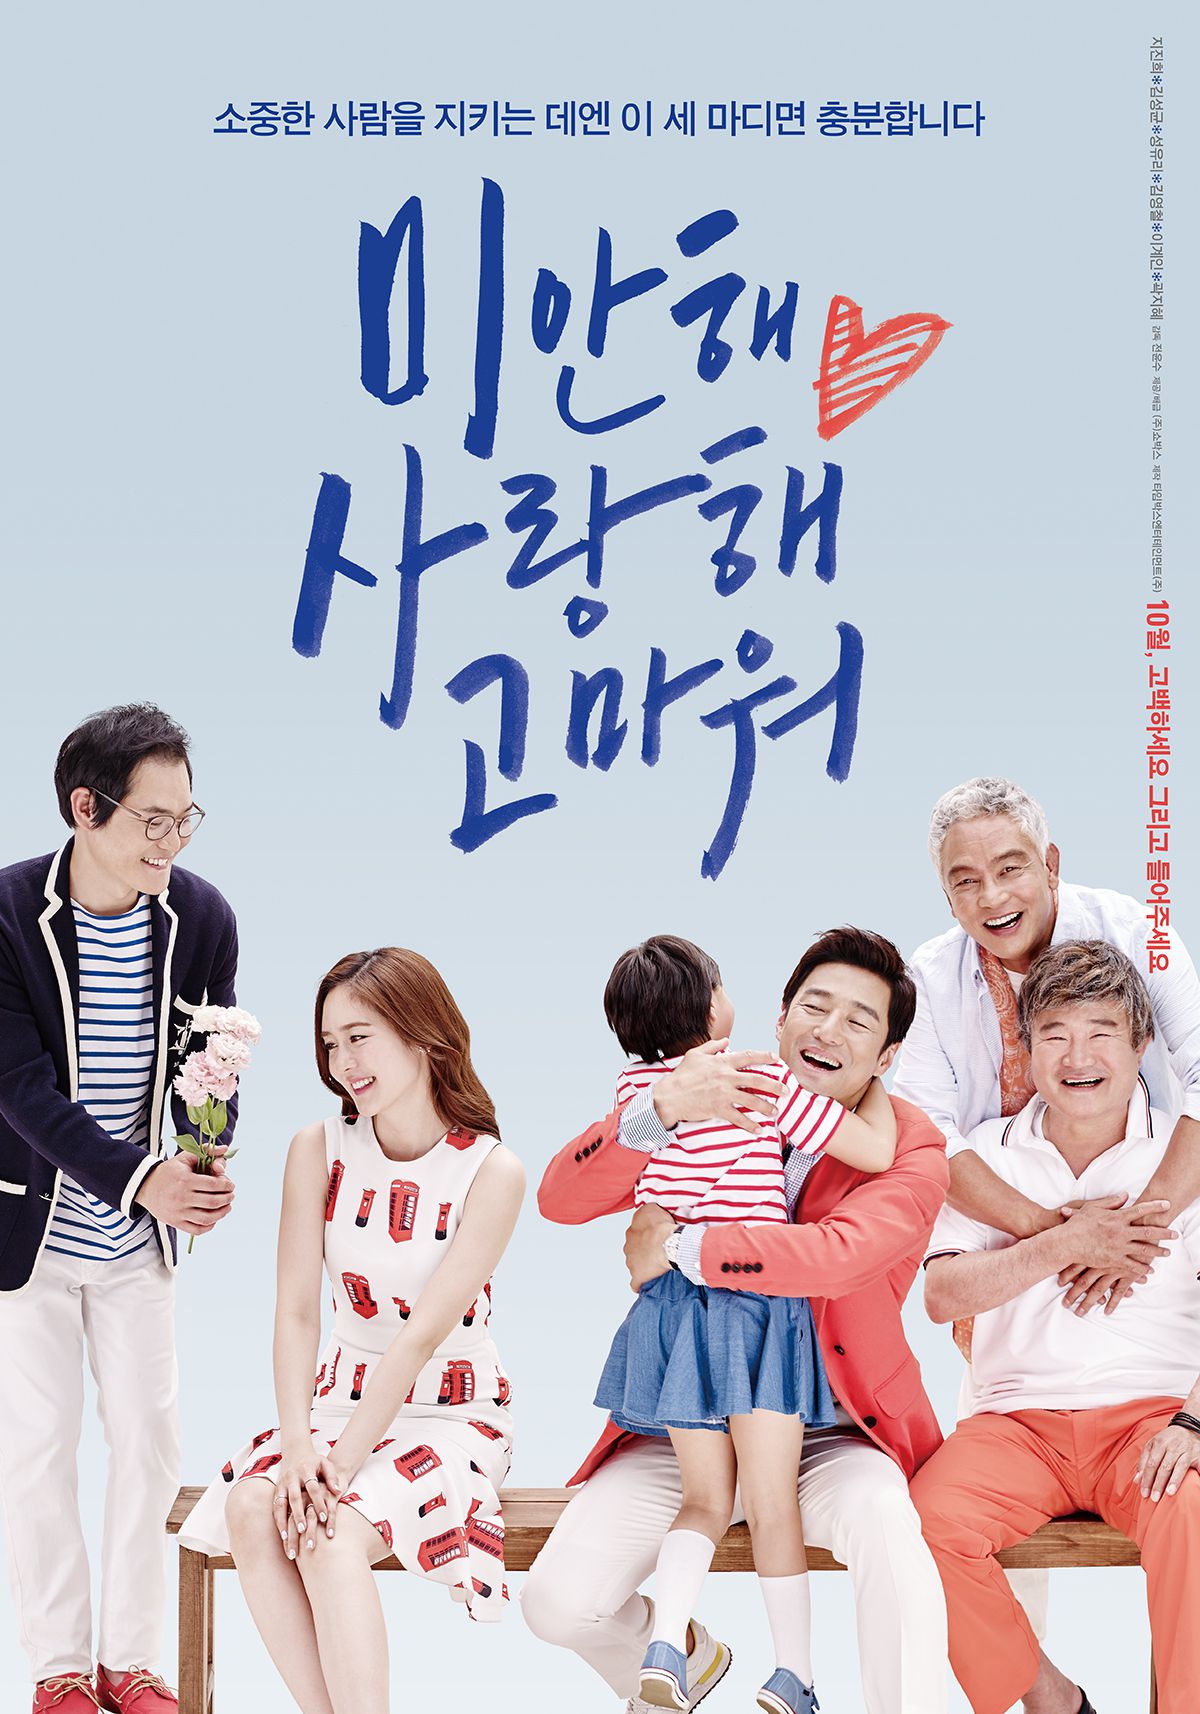 Summer Snow (Sorry, I Love You, Thank You) (2015)